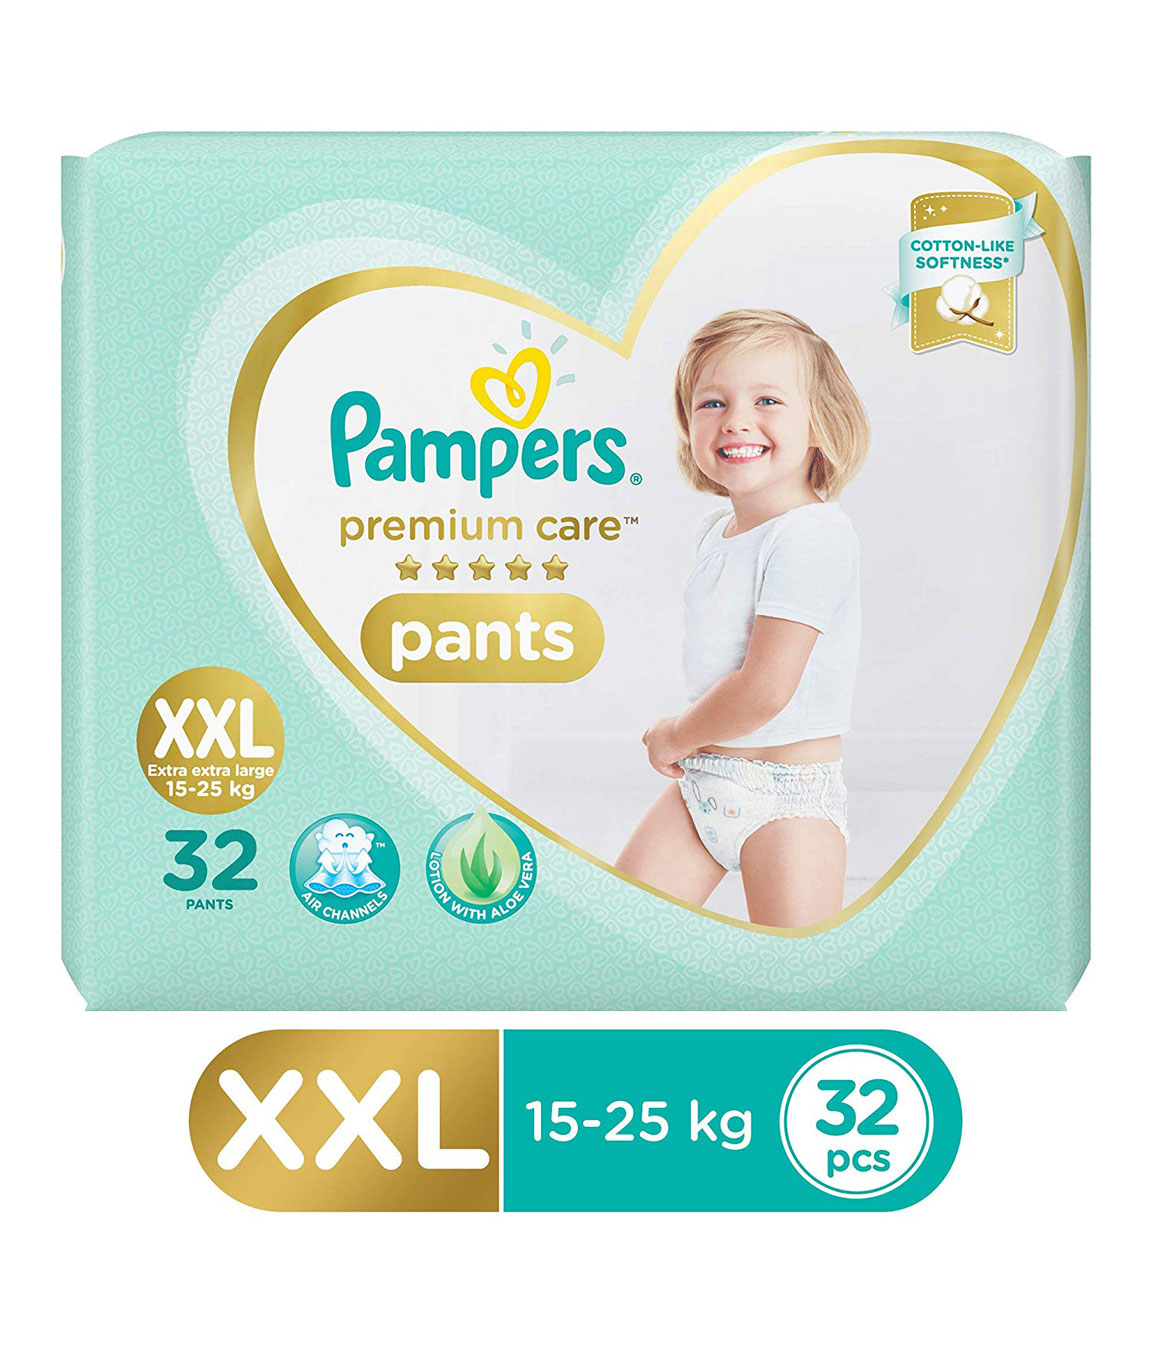 Pampers Premium Care Diapers (Choose Size and Count) - Walmart.com